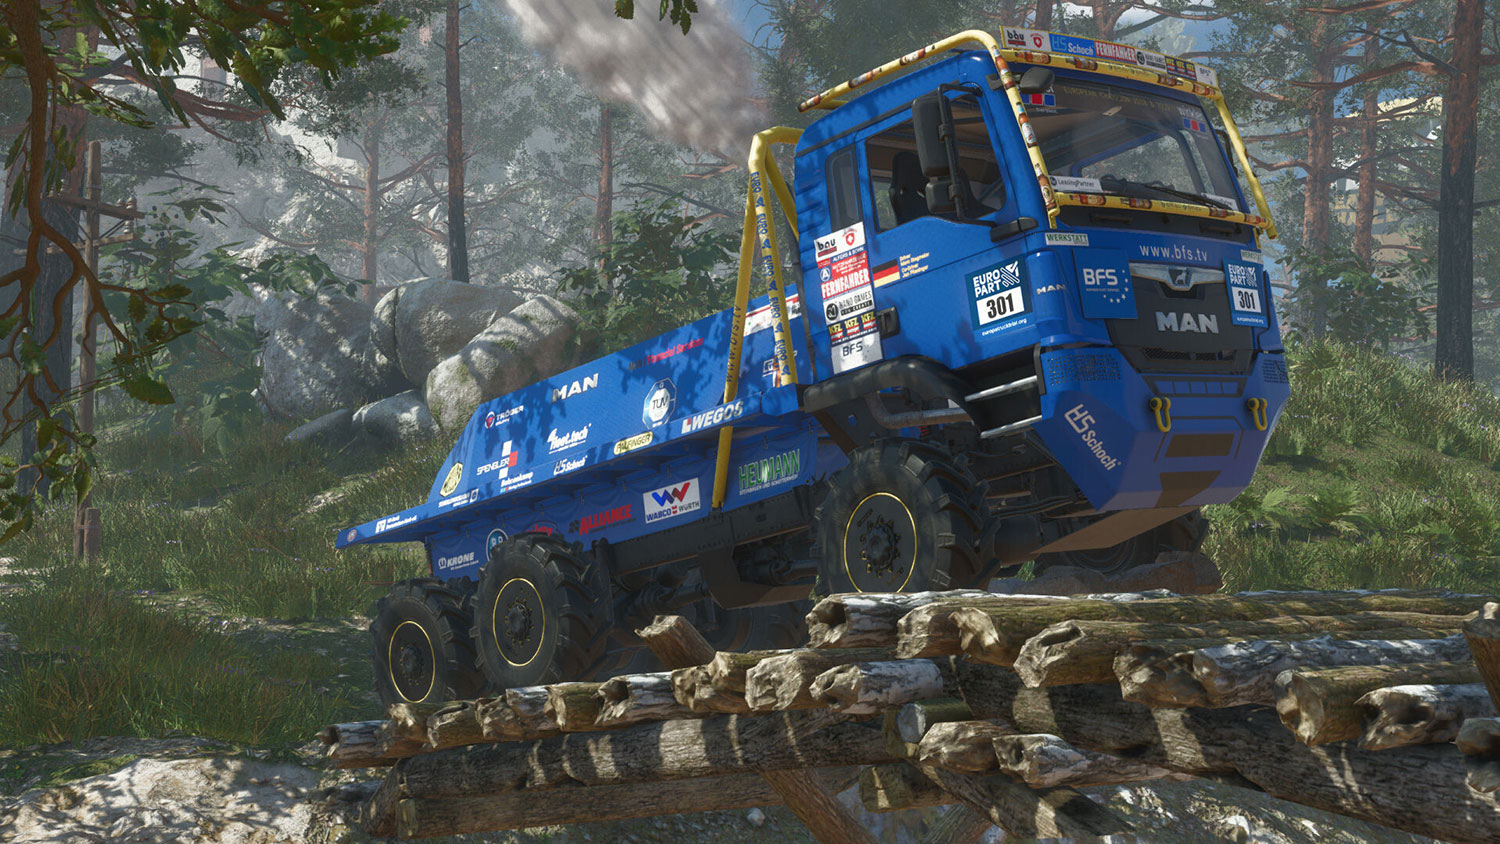 Heavy Duty Challenge®: The Off-Road Truck Simulator PS5